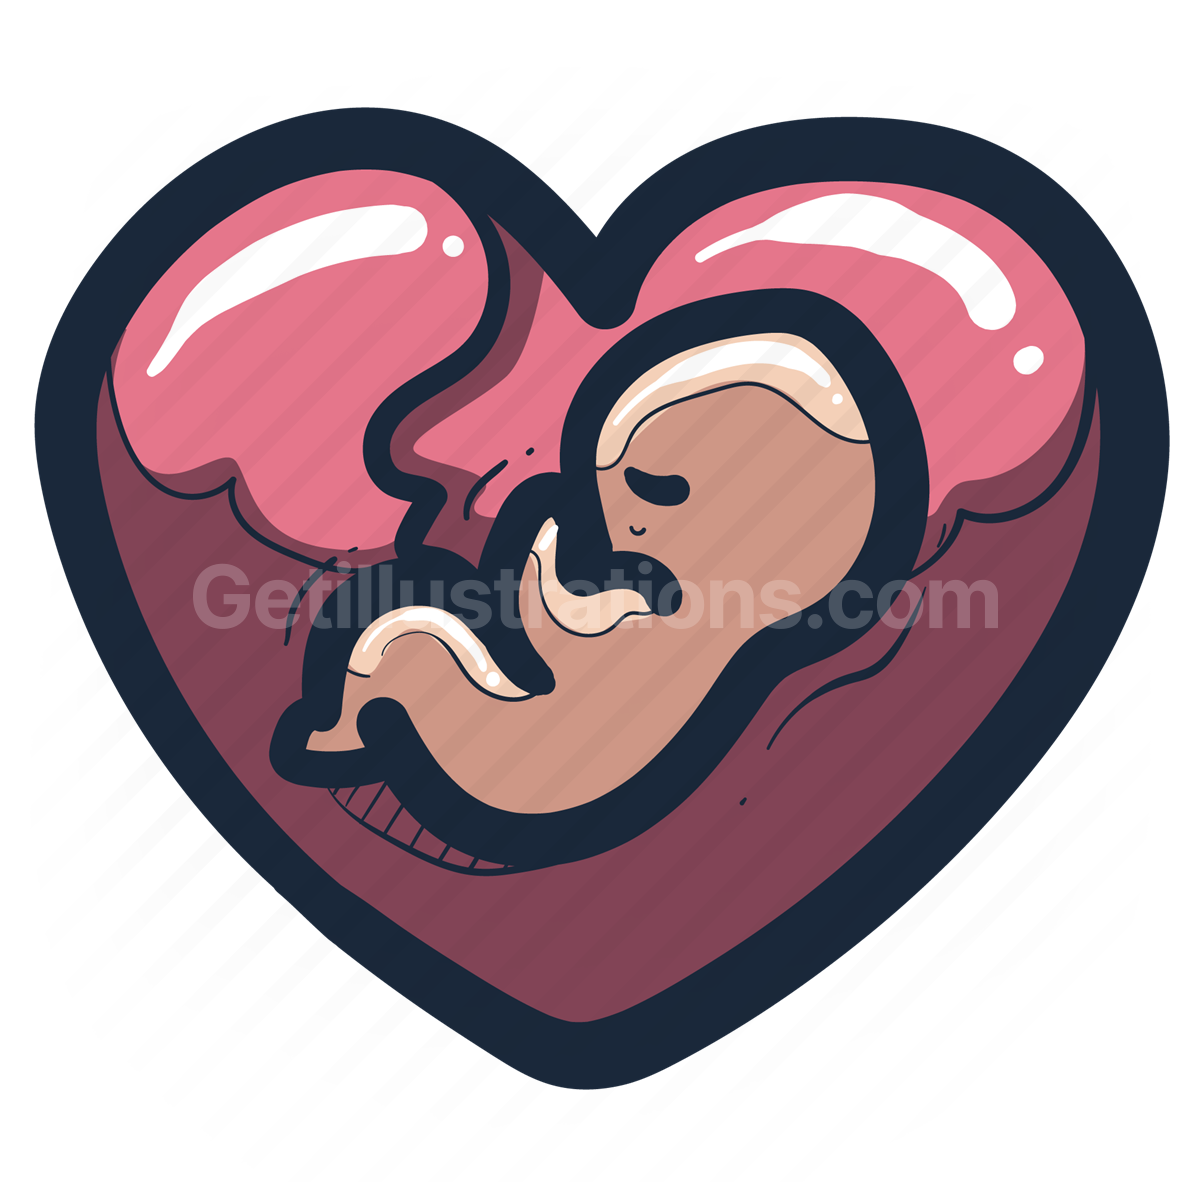 prgnancy, love, heart, family, infant, baby, reproduction